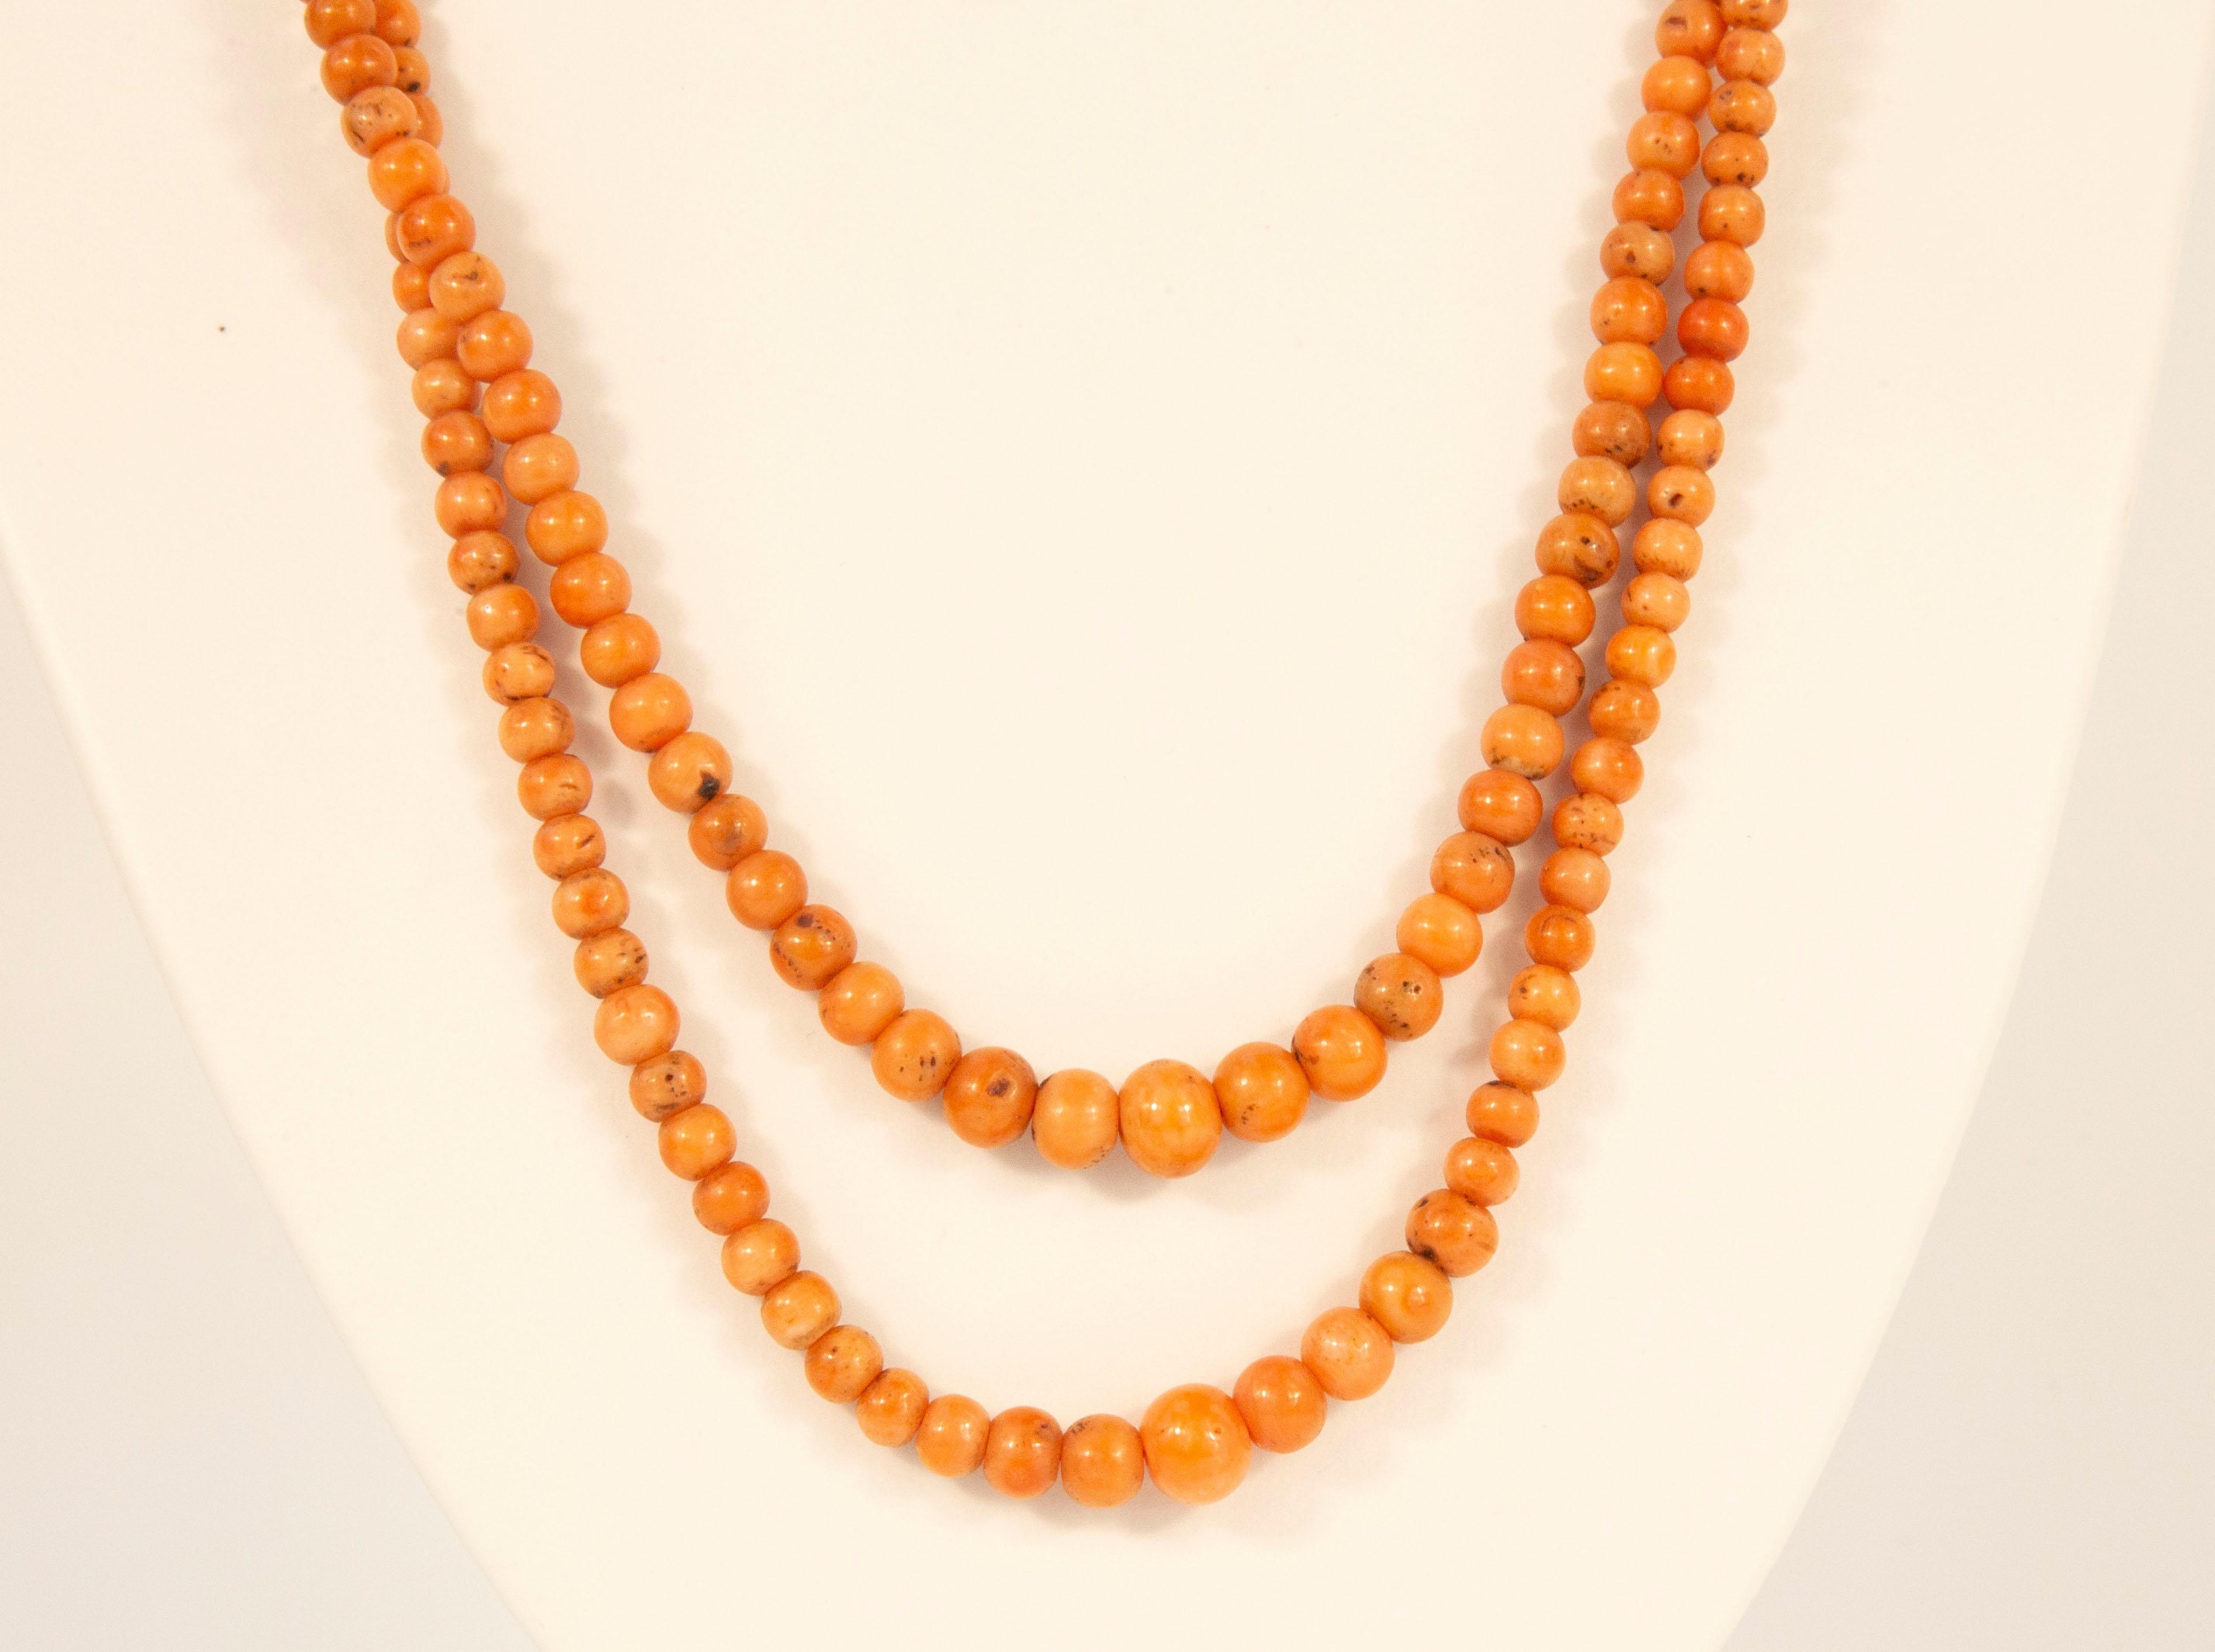 An antique 2-row genuine red coral (Corallium Rubrum*) graduated beads necklace with 14 karat yellow gold filigree closure. The necklace was made in the Netherlands in the early 1900s. The necklace has a middle length and optionally it could be worn